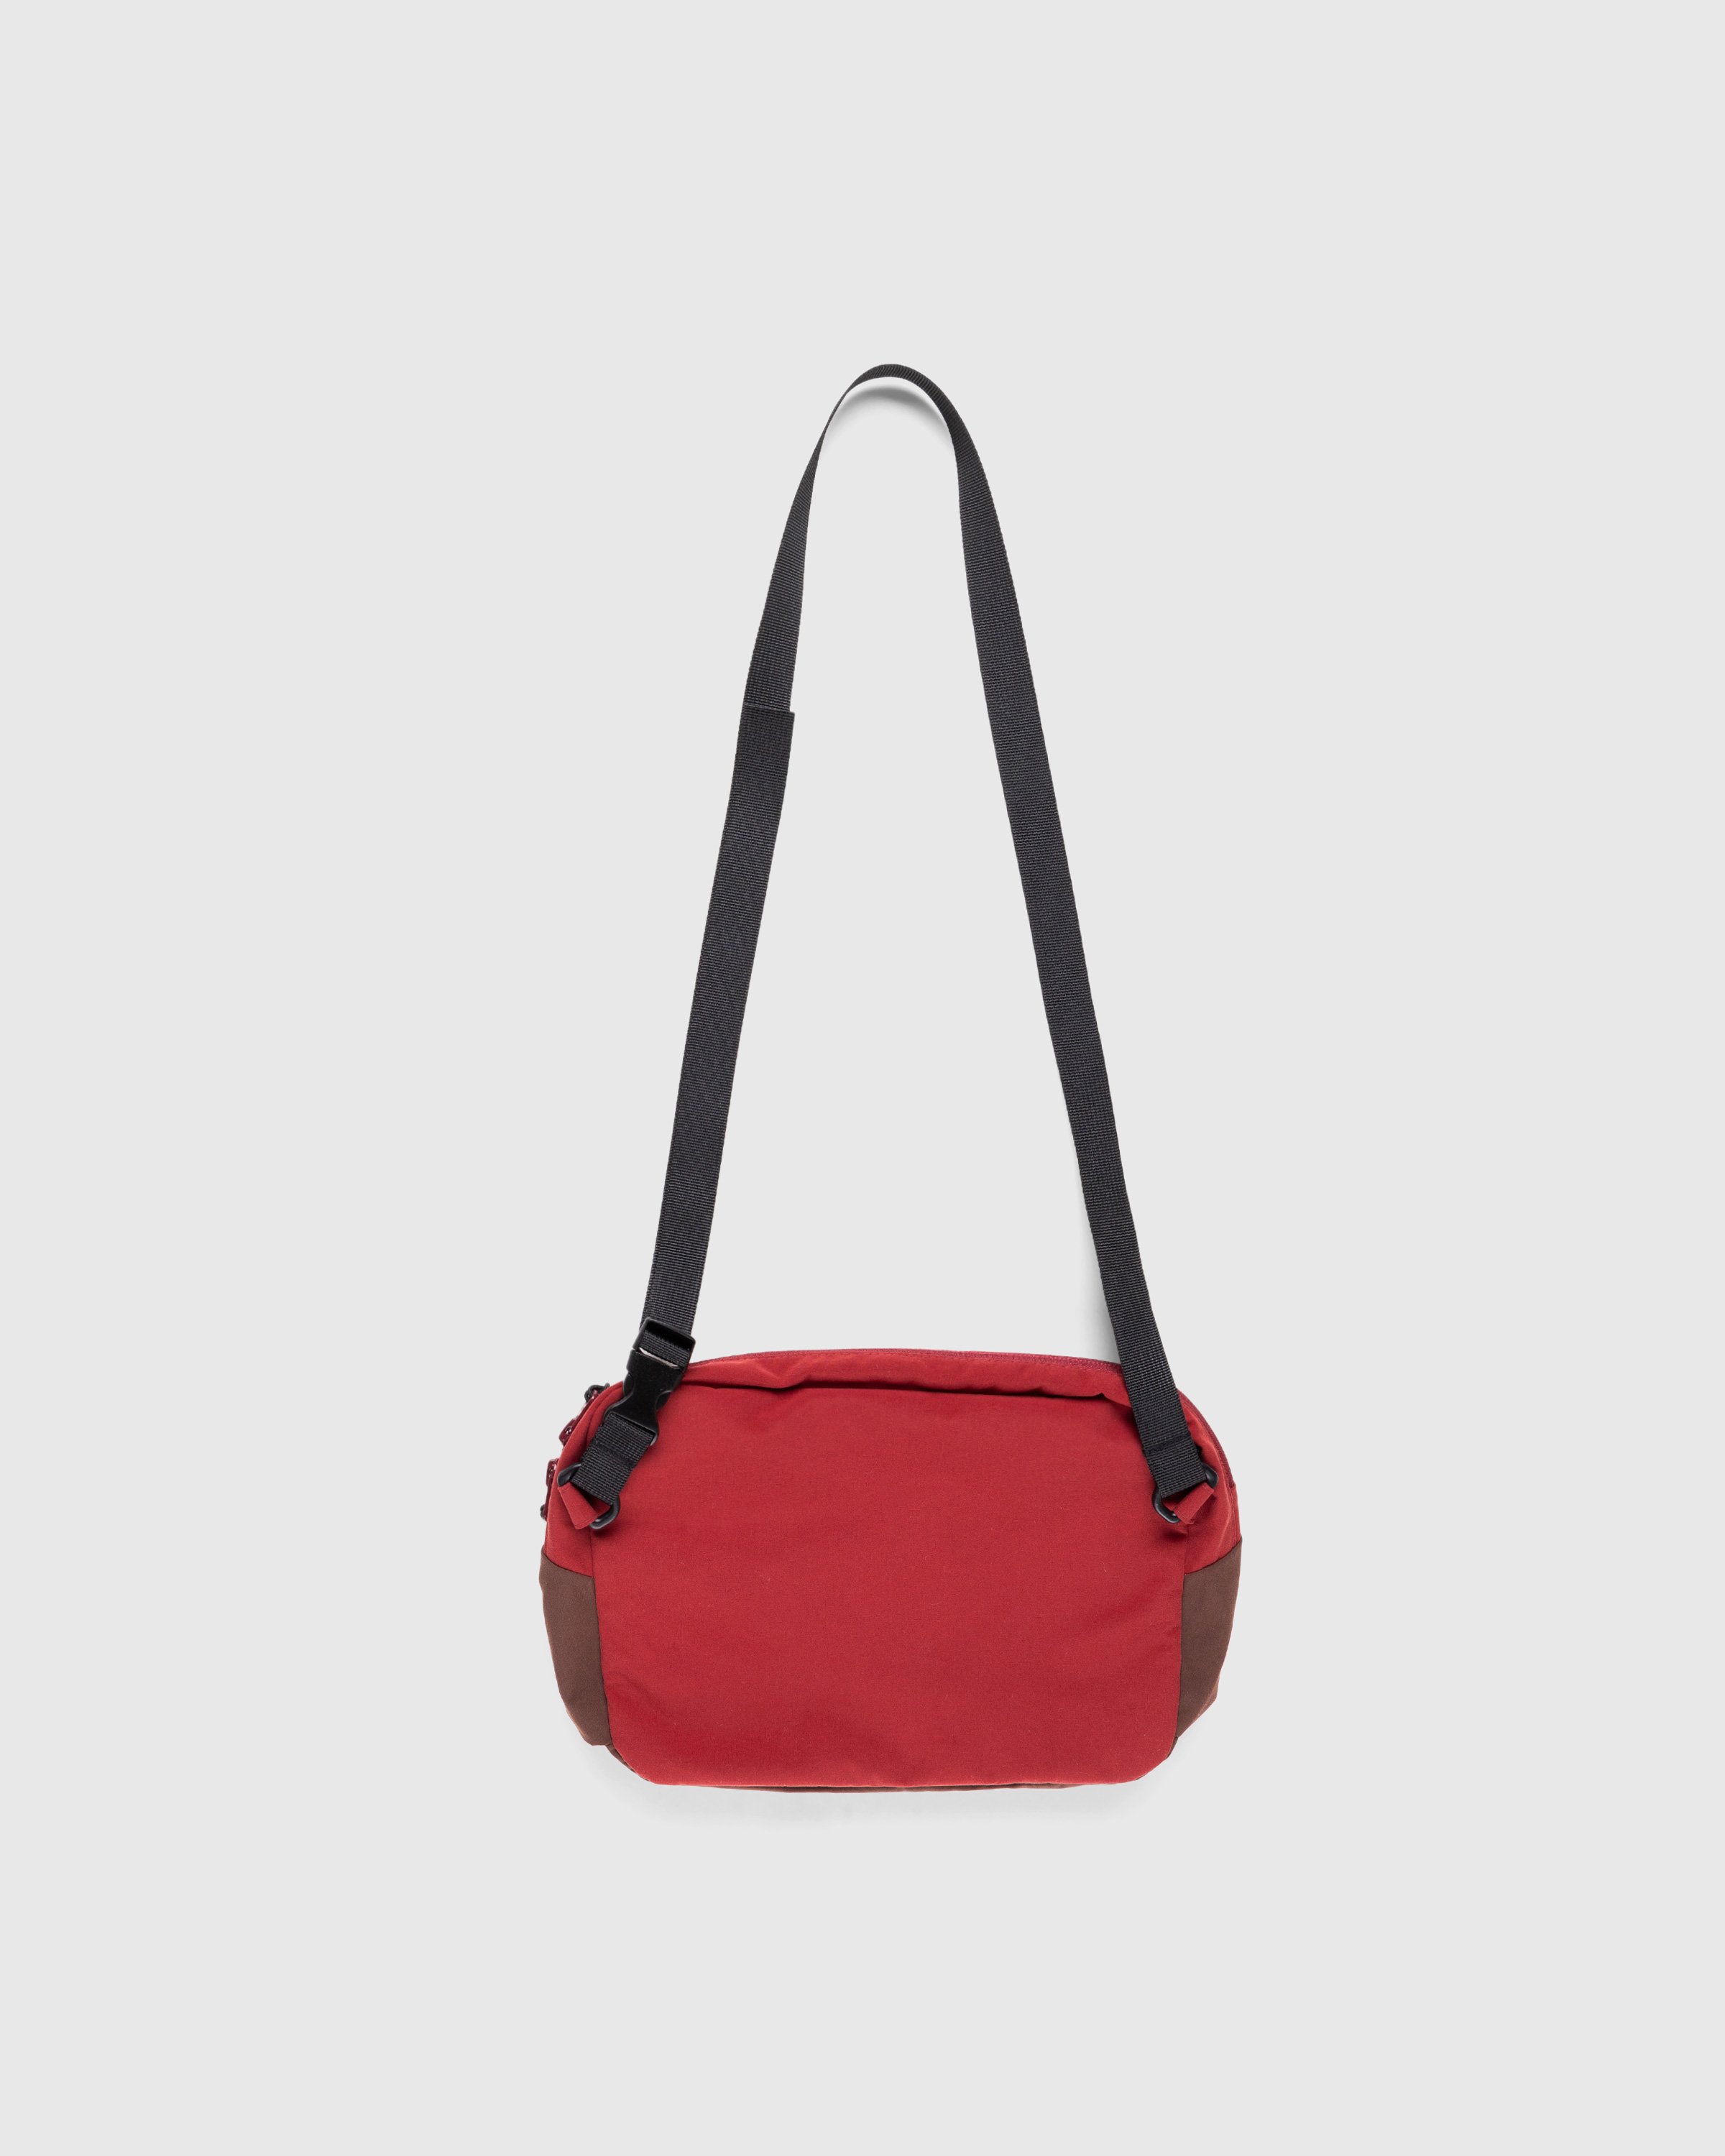 Highsnobiety HS05 - 3 Layer Nylon Side Bag Red - Accessories - Red - Image 2